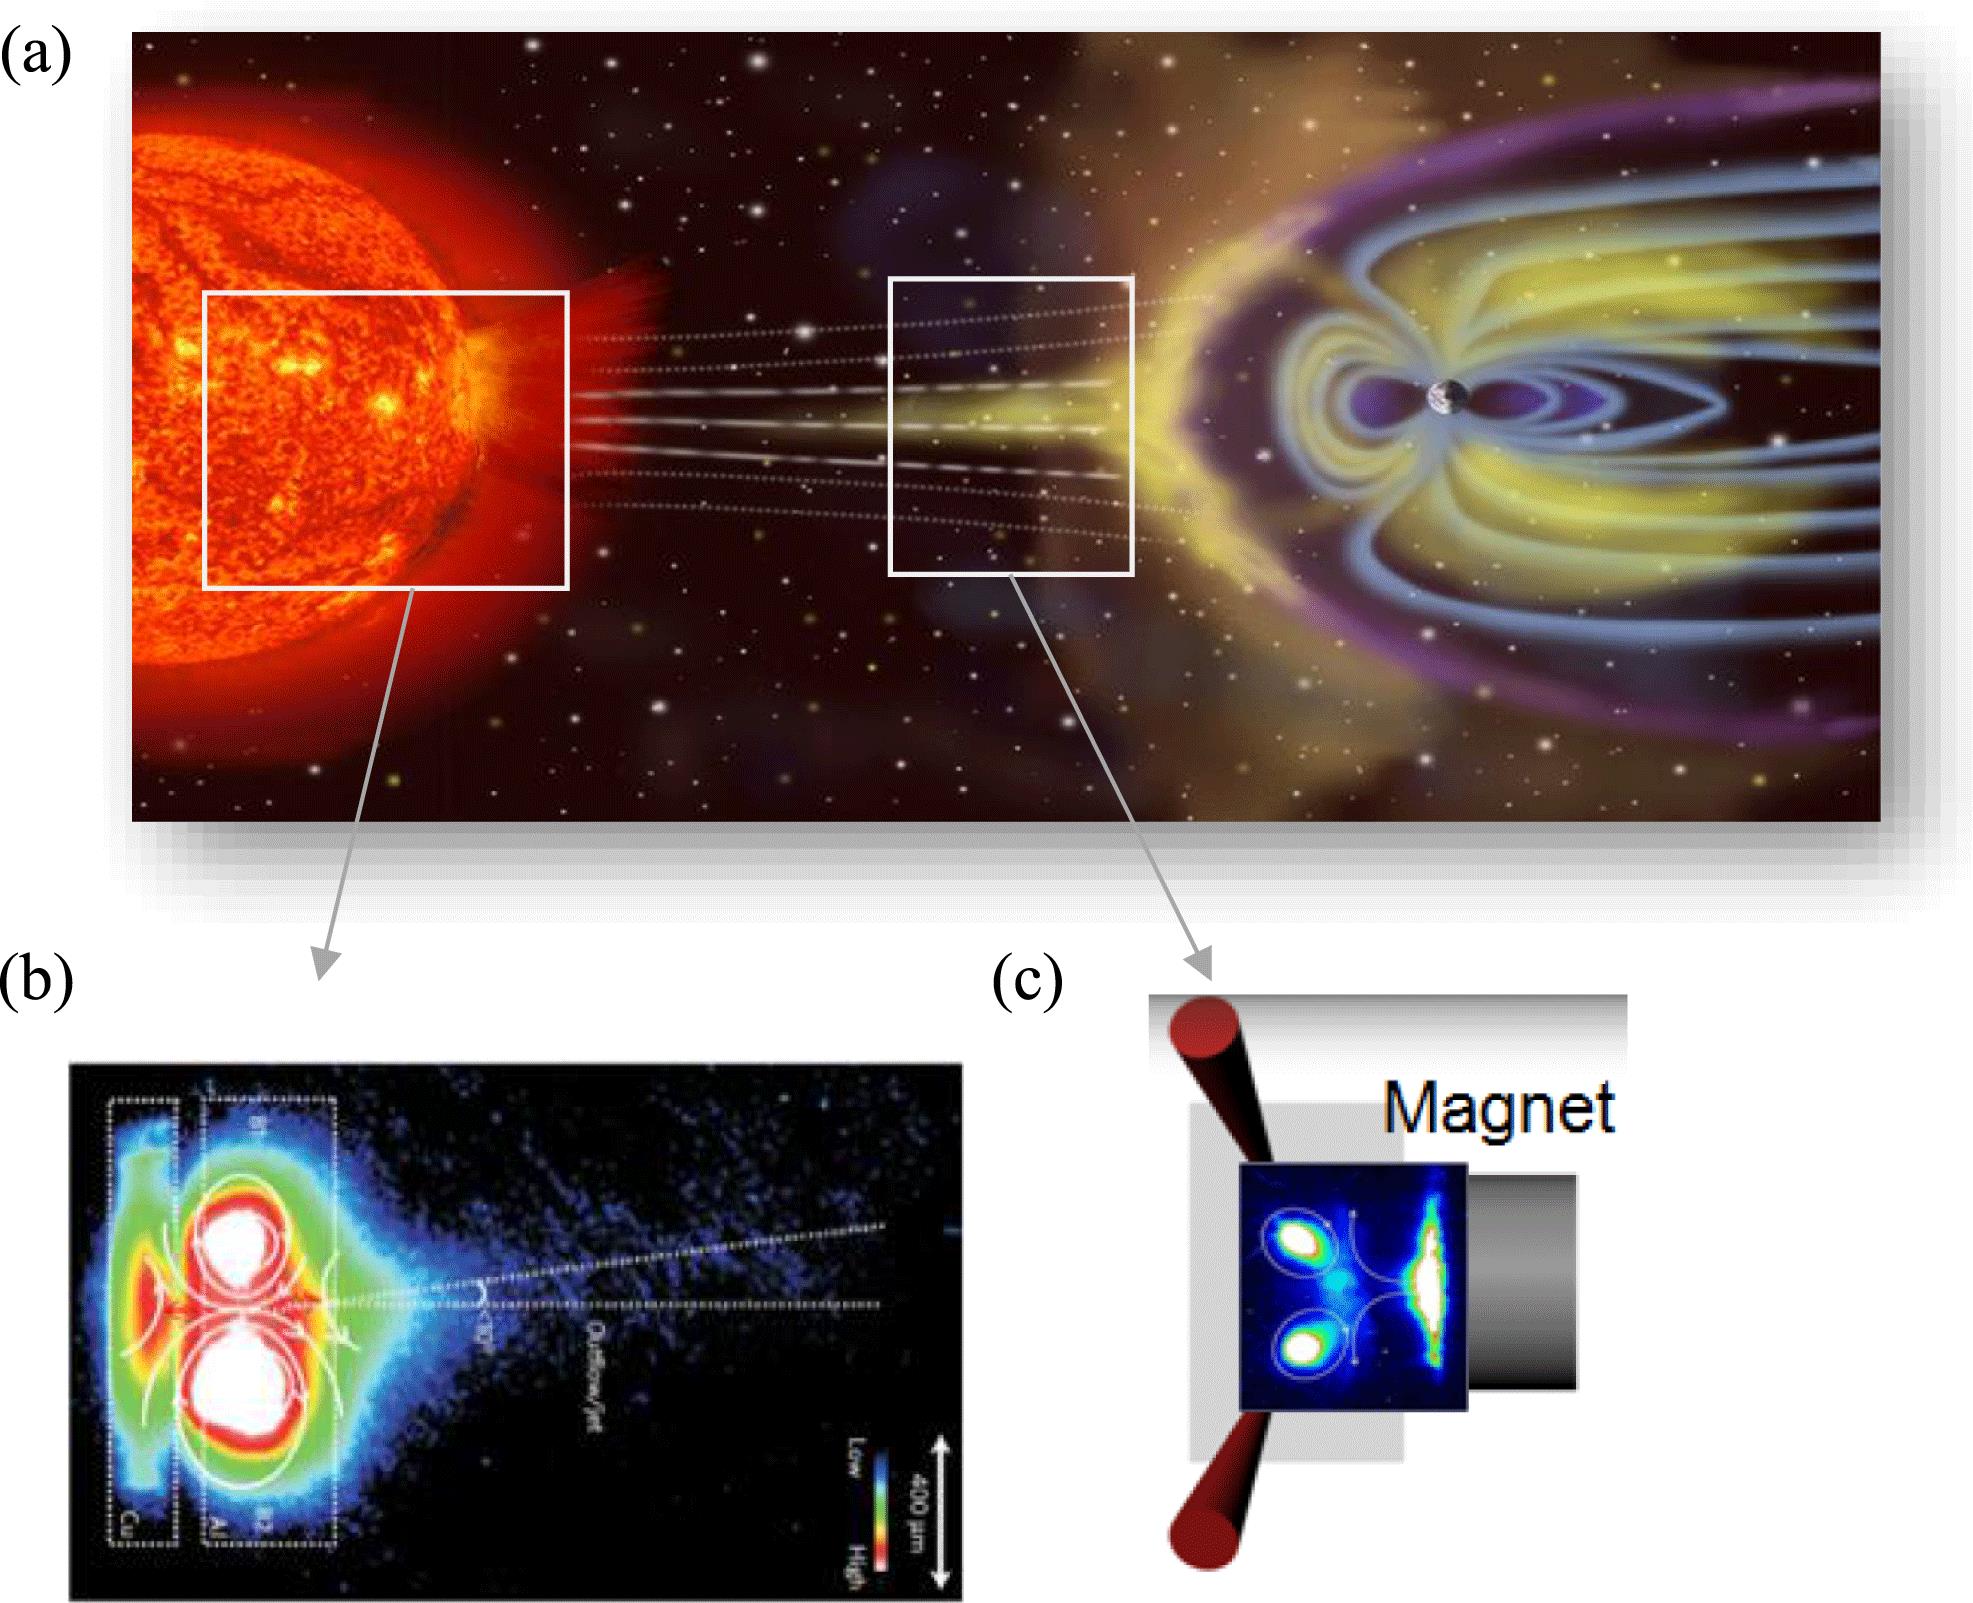 (a) Shows a cartoon simulating the solar flares and the coupling of solar wind with earth magnetosphere. (b) MR model for the loop-top x-ray source, x-ray images taken with Pinhole camera in the experiment. (c) MR model for the interaction of solar wind with magnetosphere, one micro-solar-flare is produced by two intense laser beams interacting with a solid aluminum block, and the outflow interacts with a preset permanent magnetic pole.